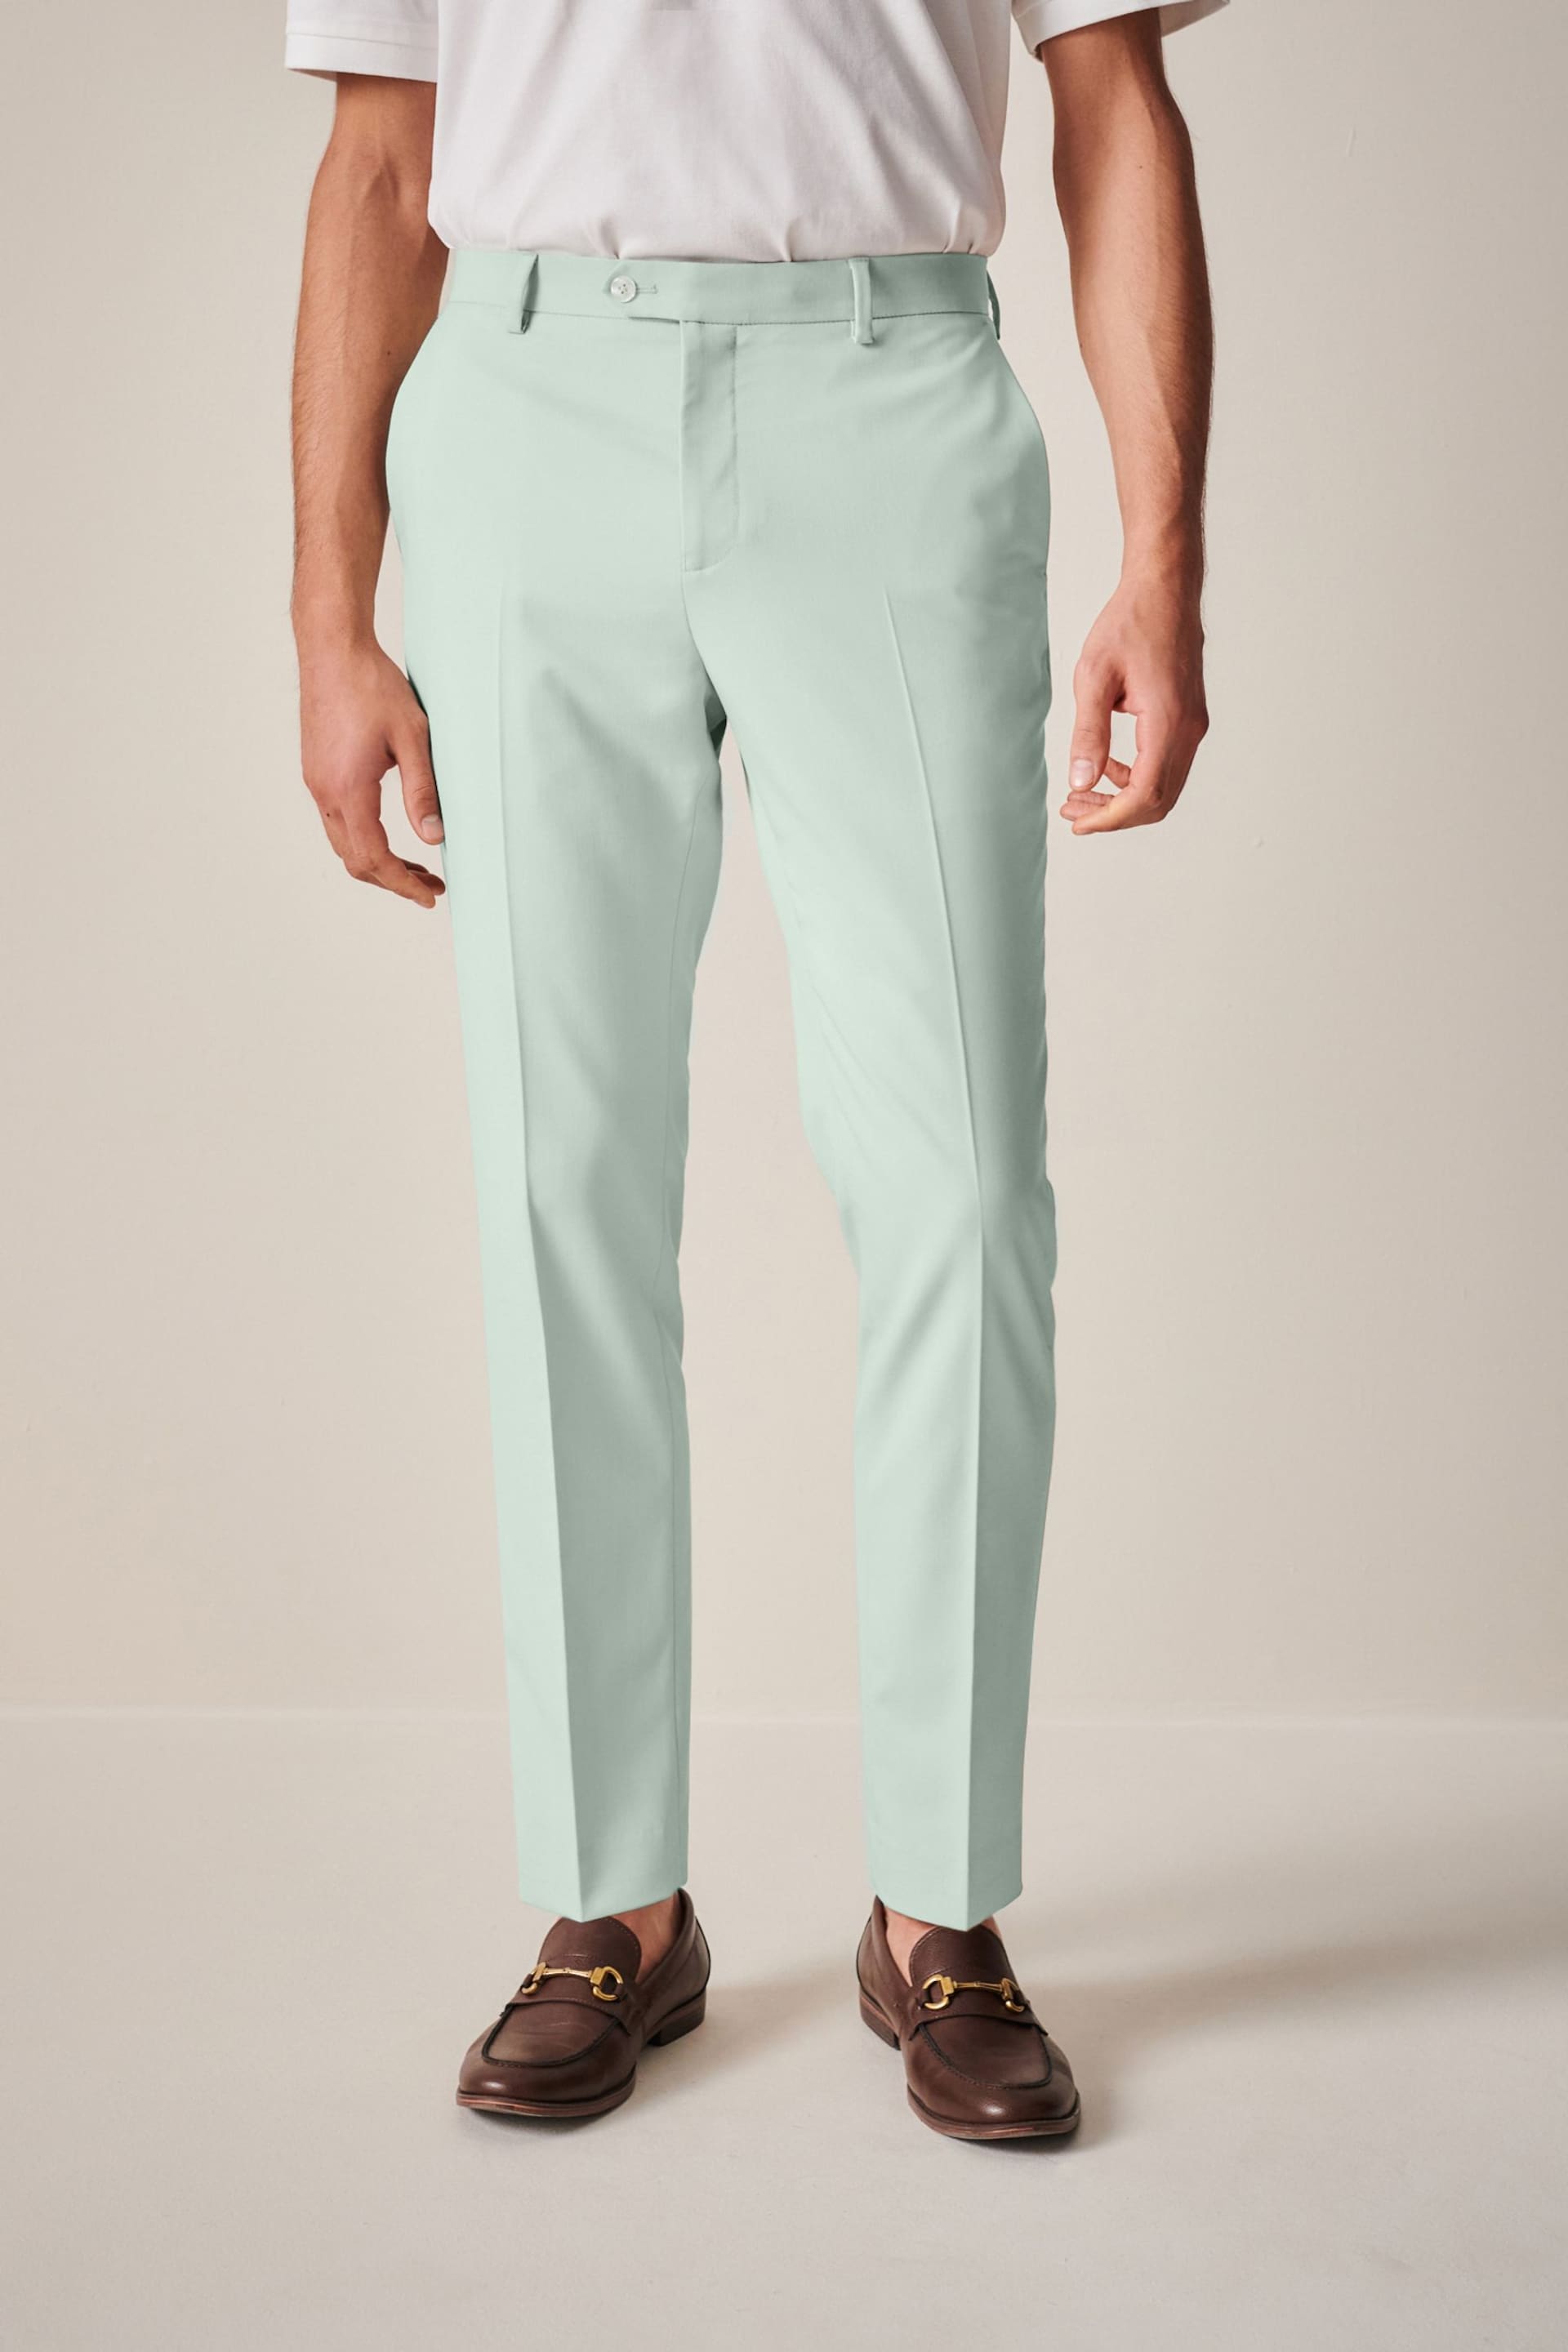 Mint Green Skinny Fit Motionflex Stretch Suit: Trousers - Image 1 of 7